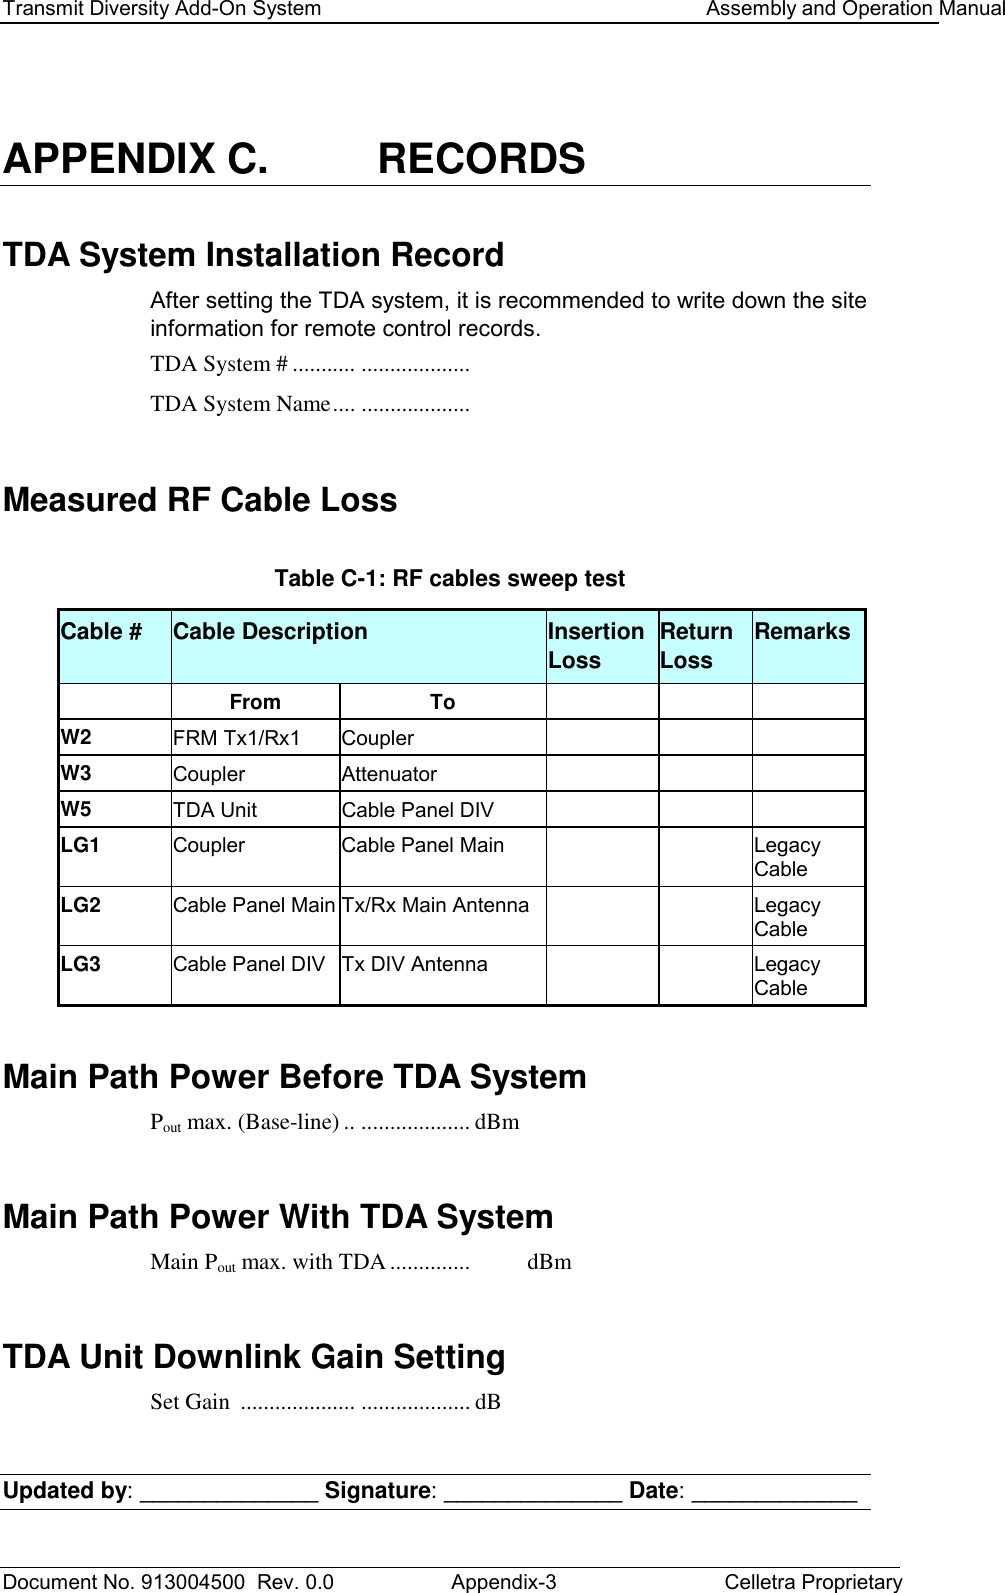 Transmit Diversity Add-On System   Assembly and Operation Manual  Document No. 913004500  Rev. 0.0  Appendix-3  Celletra Proprietary   APPENDIX C.    RECORDS TDA System Installation Record After setting the TDA system, it is recommended to write down the site information for remote control records. TDA System # ........... ...................  TDA System Name.... ...................  Measured RF Cable Loss   Table C-1: RF cables sweep test Cable #  Cable Description  Insertion Loss  Return Loss   Remarks     From  To          W2 FRM Tx1/Rx1  Coupler          W3 Coupler  Attenuator          W5 TDA Unit  Cable Panel DIV          LG1  Coupler  Cable Panel Main      Legacy Cable LG2  Cable Panel Main Tx/Rx Main Antenna      Legacy Cable LG3  Cable Panel DIV  Tx DIV Antenna      Legacy Cable Main Path Power Before TDA System Pout max. (Base-line) .. ................... dBm Main Path Power With TDA System Main Pout max. with TDA ..............   dBm TDA Unit Downlink Gain Setting Set Gain  .................... ................... dB  Updated by: ______________ Signature: ______________ Date: _____________ 